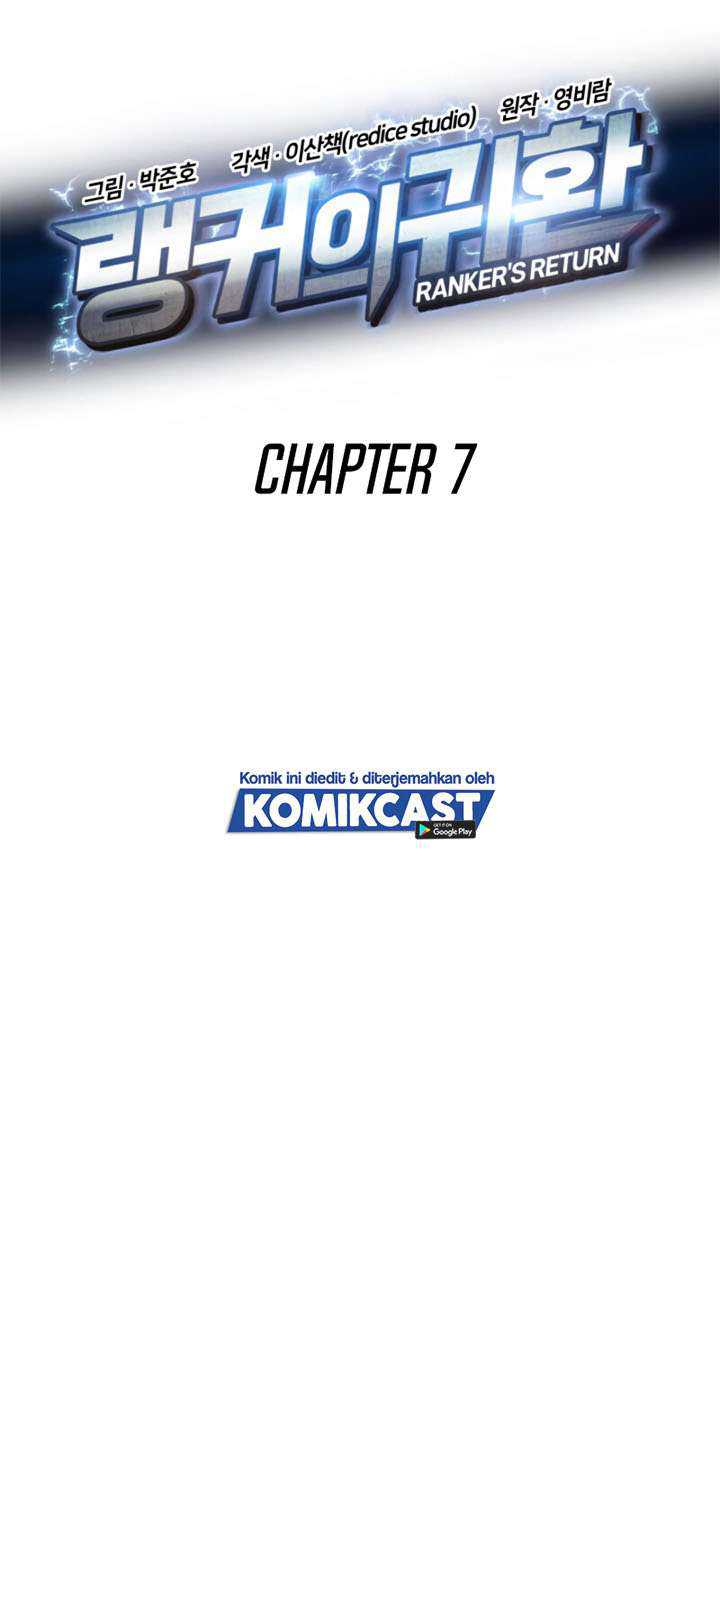 rankers-return-remake Chapter chapter-07